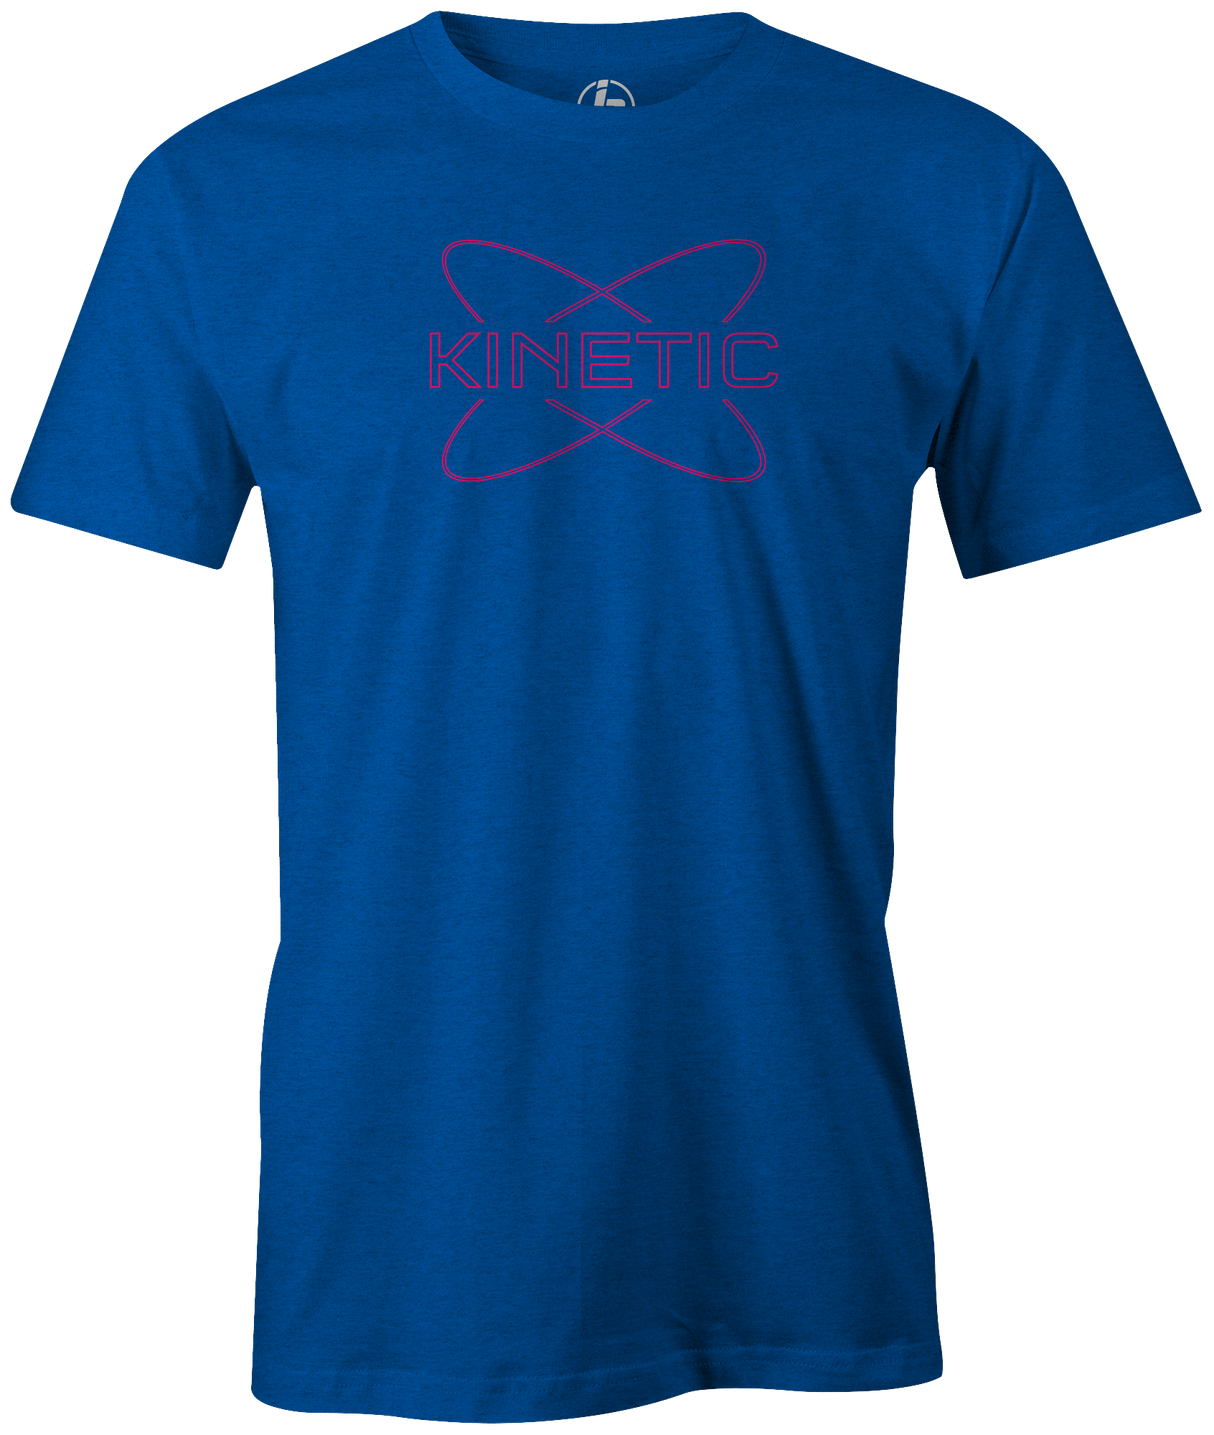 Need more energy when you bowl? Get the juices flowing in this Track Kinetic Cobalt Tee. This awesome bowling shirt is the perfect gift for any track fan or long time bowler. Hit the lanes in this tee and throw some strikes!  Tshirt, tee, tee-shirt, tee shirt, Pro shop. League bowling team shirt. PBA. PWBA. USBC. Junior Gold. Youth bowling. Tournament t-shirt. Men's. Bowling Ball. Track bowling. Smart bowling. 